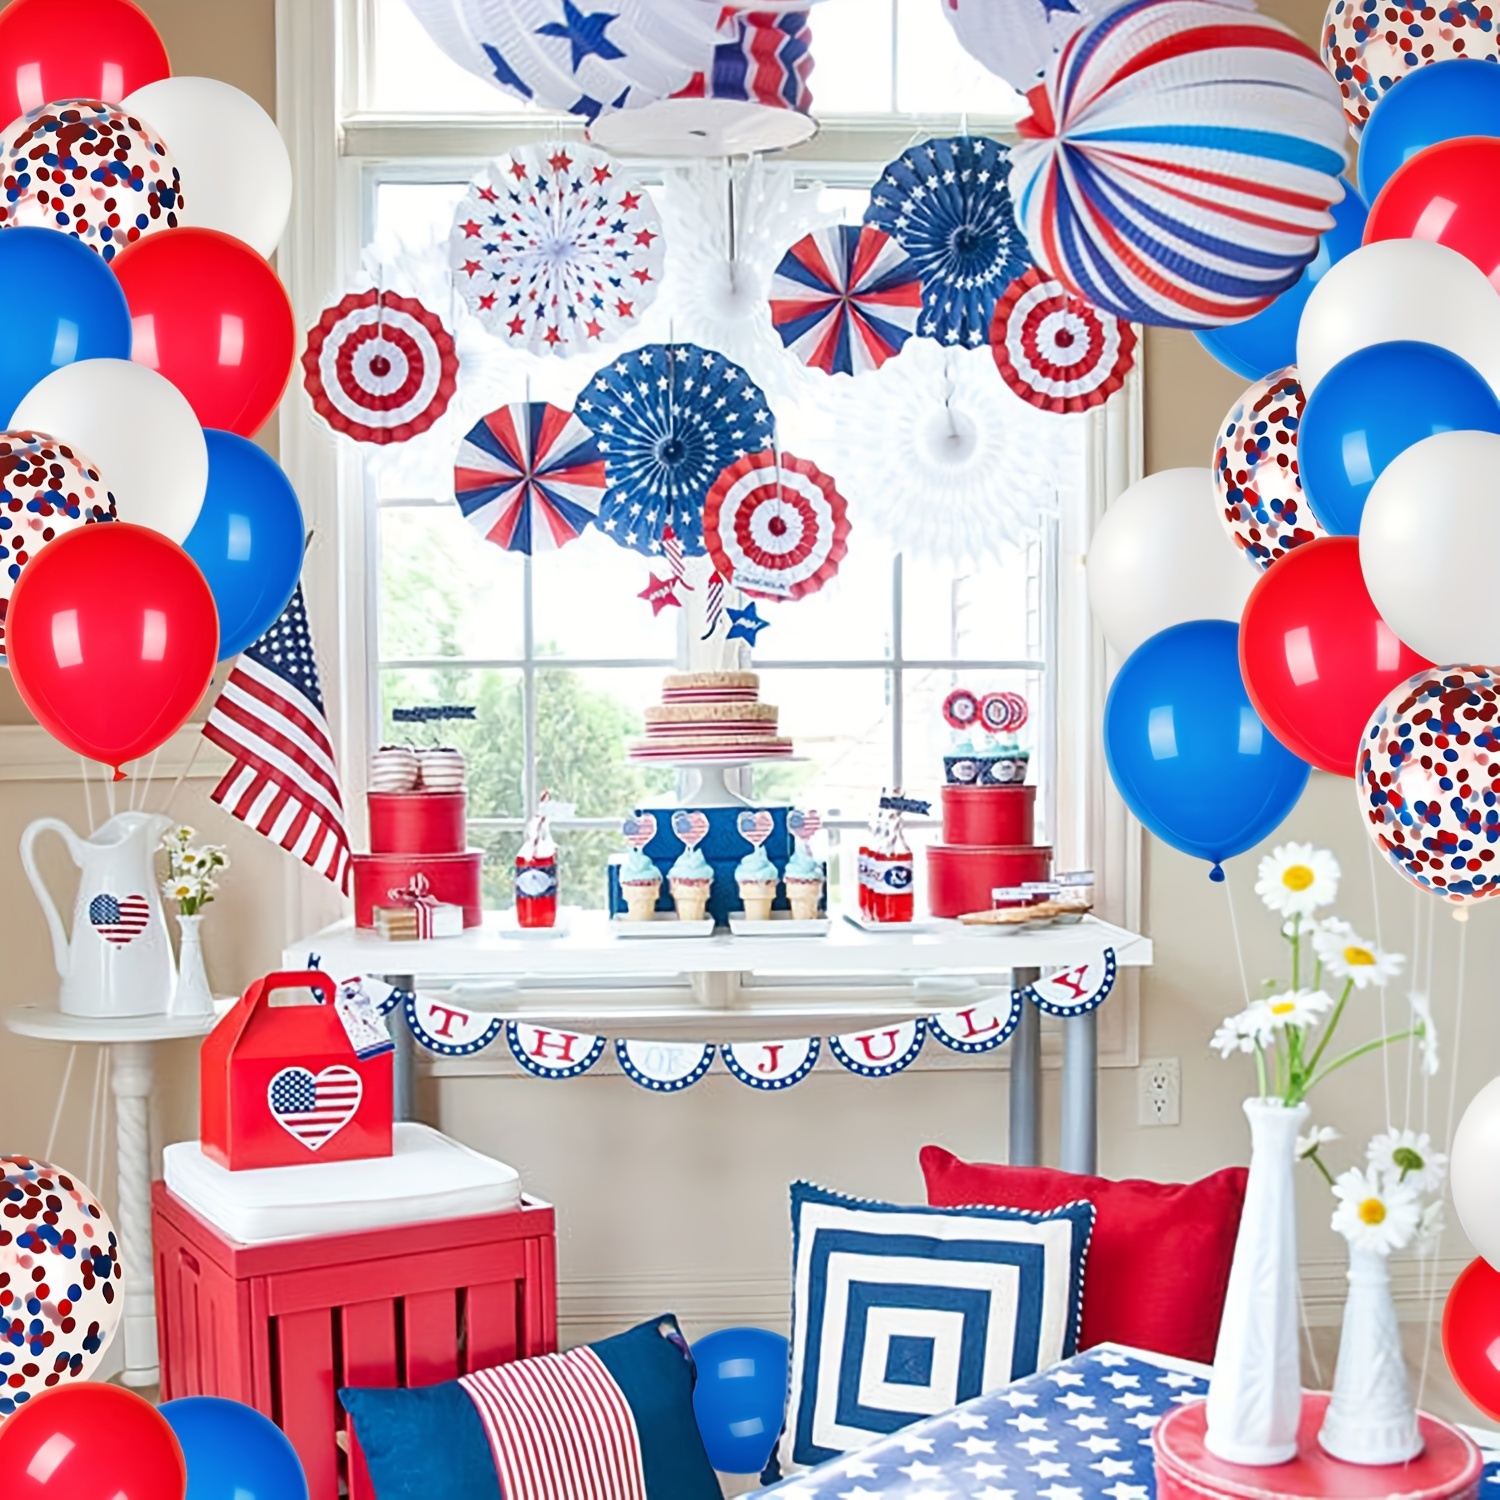 Red and Blue Nautical Latex Balloons (6)